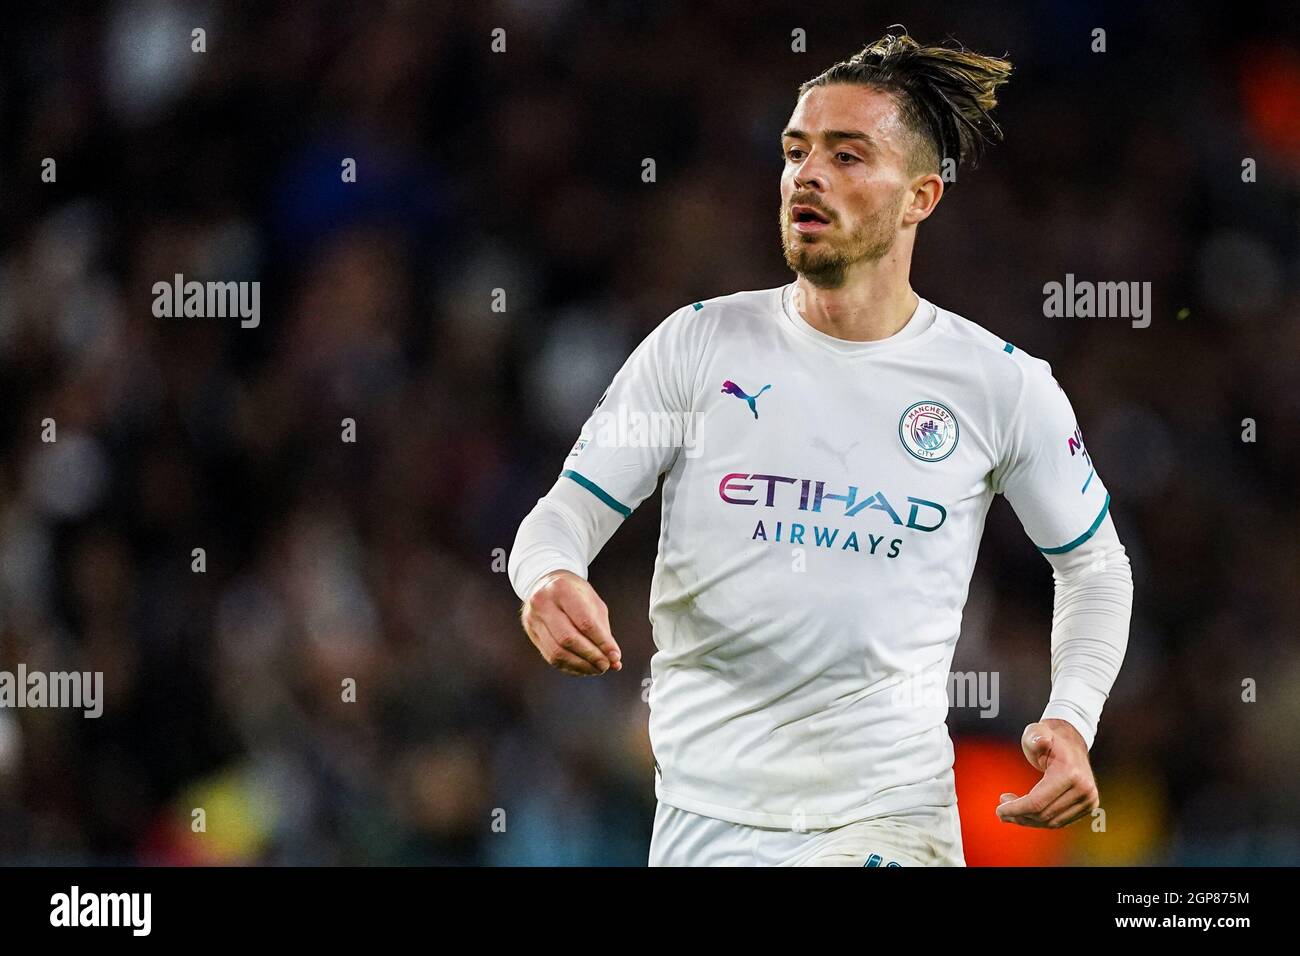 PARIS, FRANCE - SEPTEMBER 28: Jack Grealish of Manchester City FC during the Champions League match between Paris Saint-Germain and Manchester City FC at Parc des Princes on September 28, 2021 in Paris, France (Photo by Jeroen Meuwsen/Orange Pictures) Stock Photo